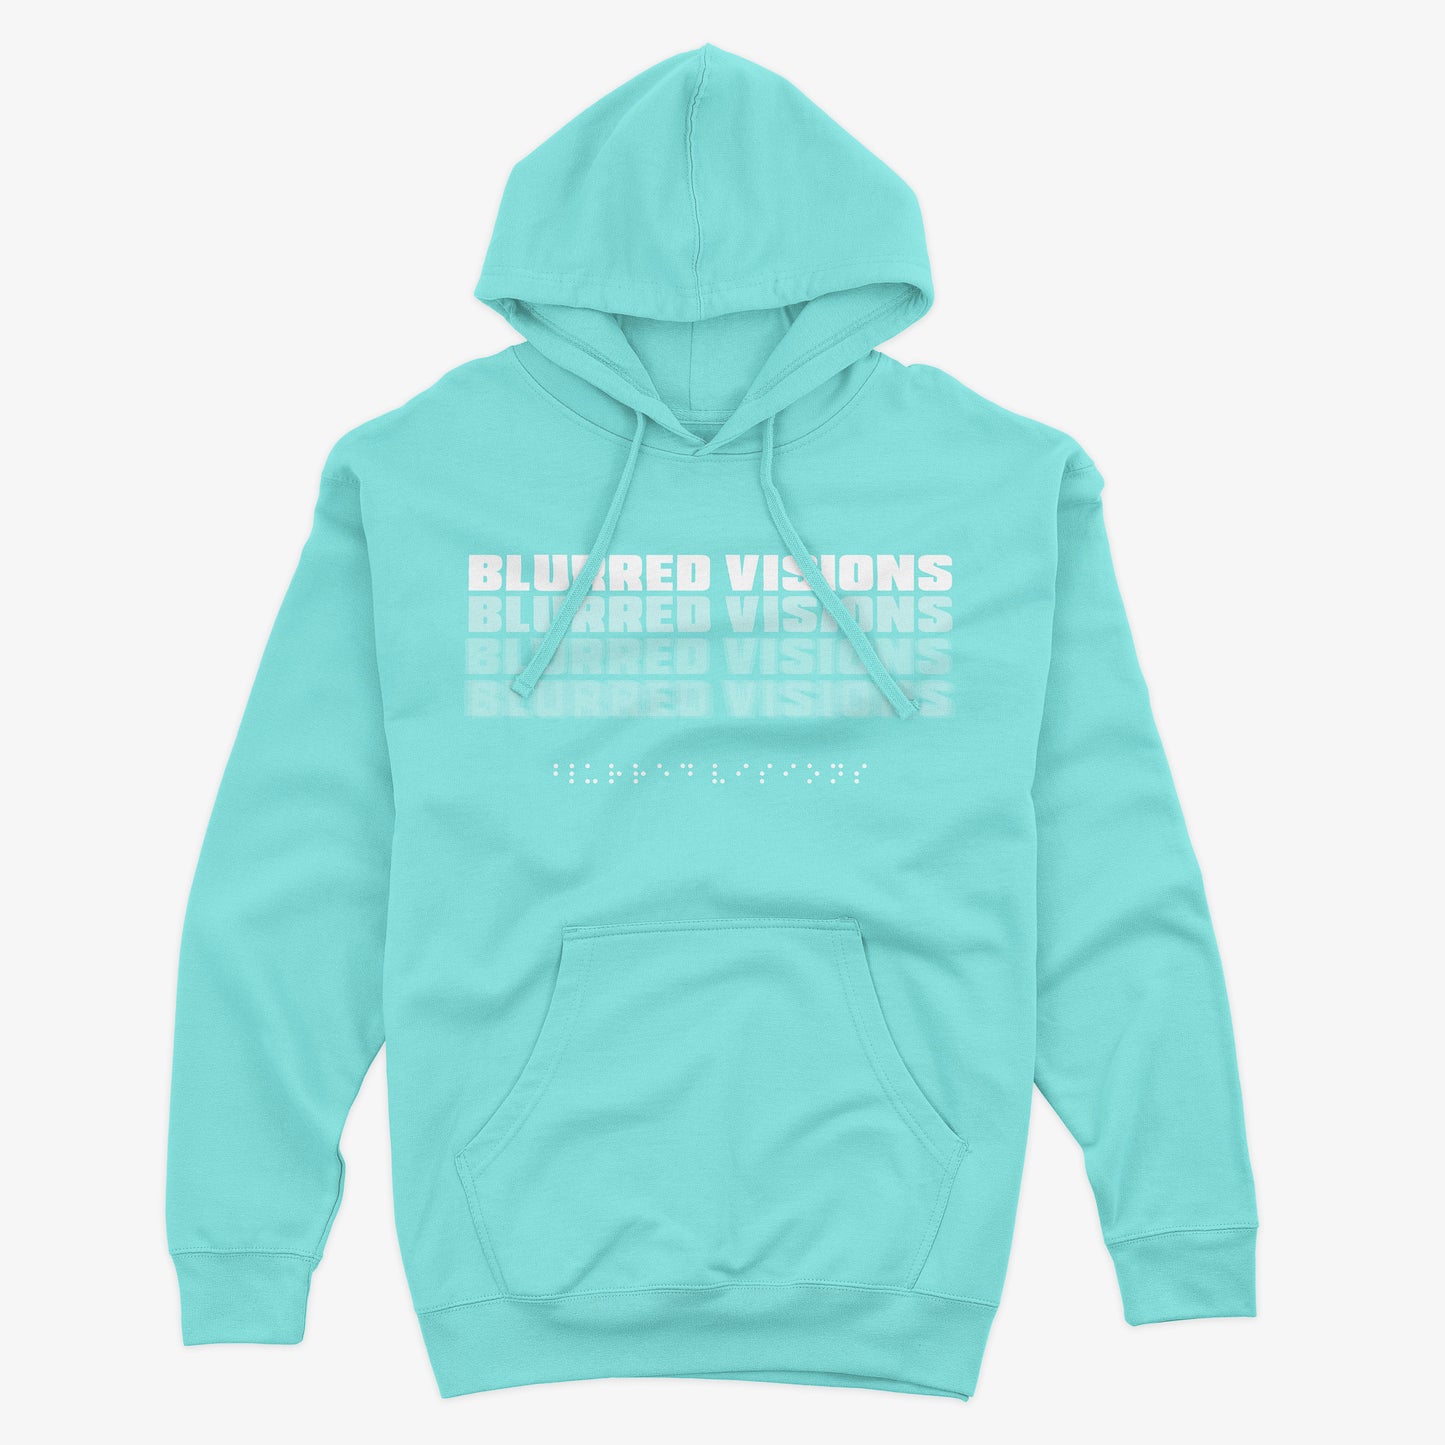 Blurred Visions - Limited Edition - Summer Colors Hoodie